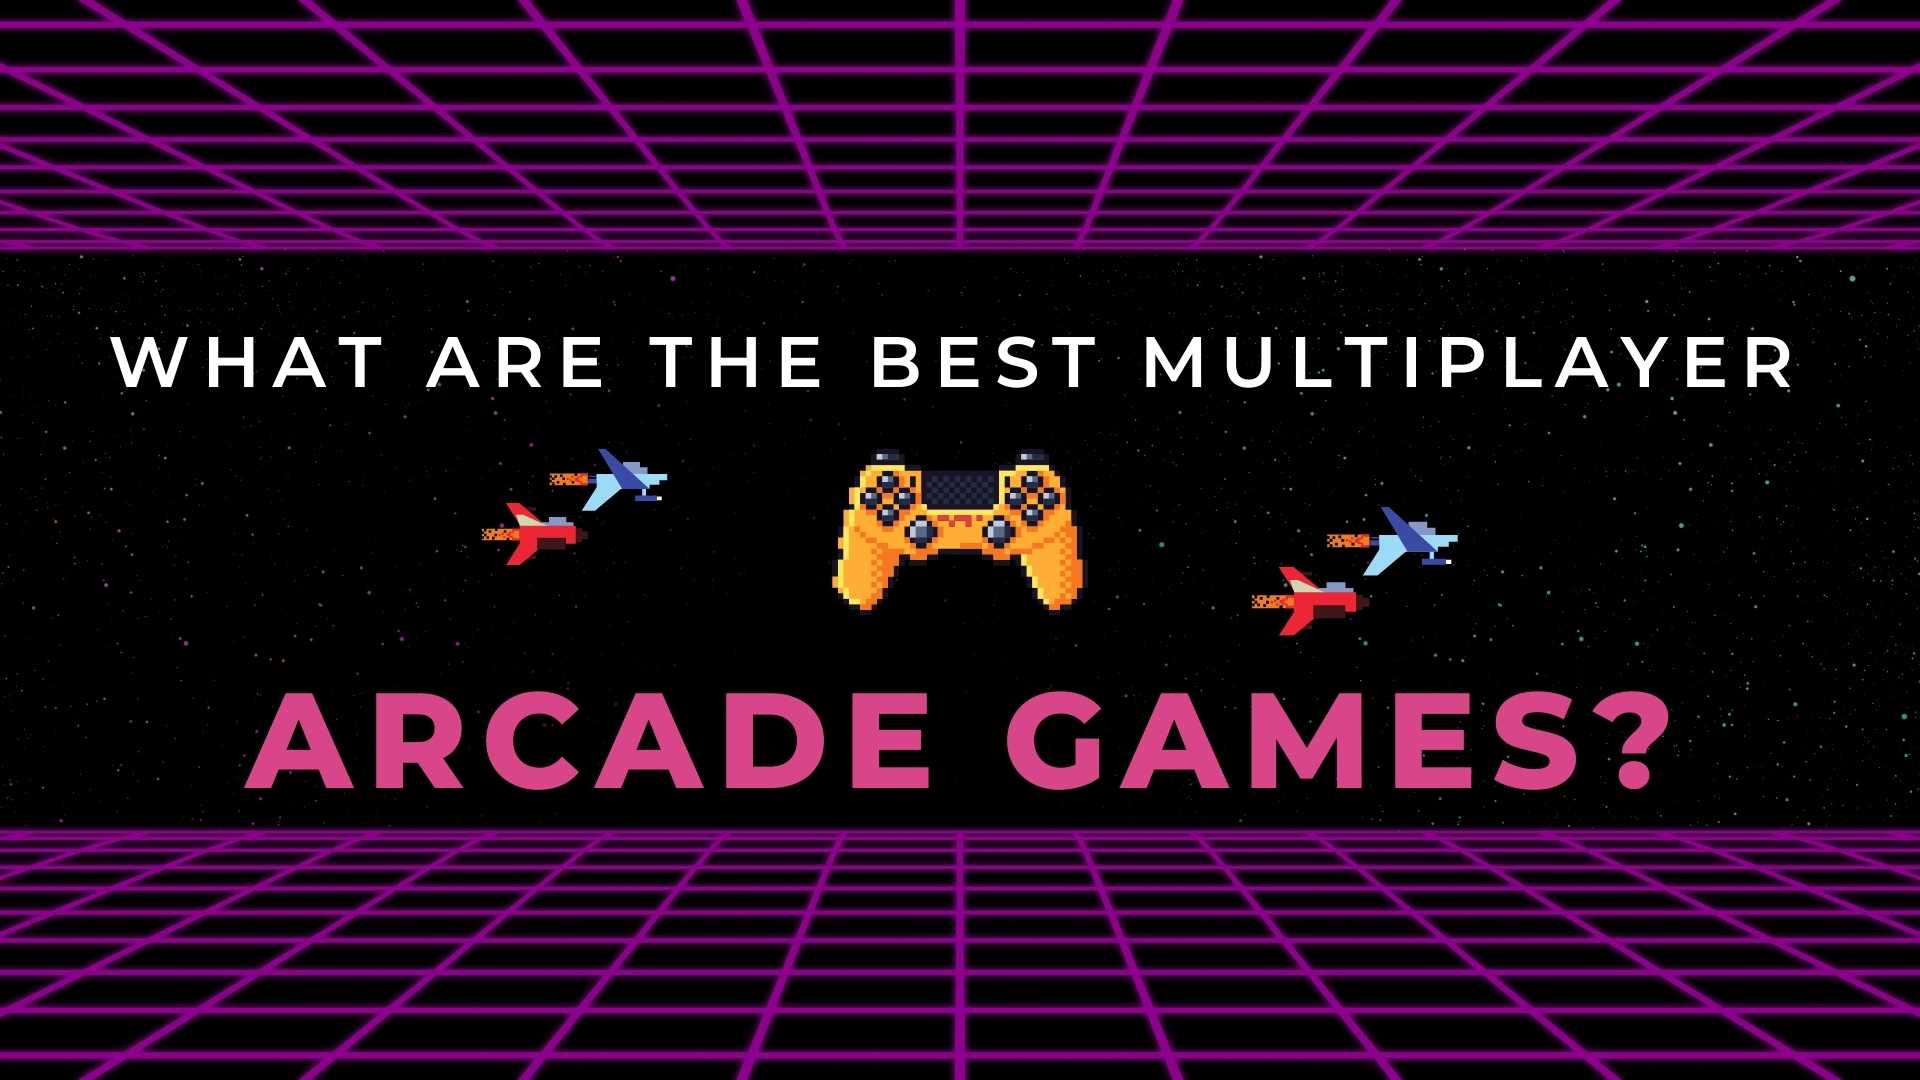 8 best multiplayer arcade games of all time - Gamestate